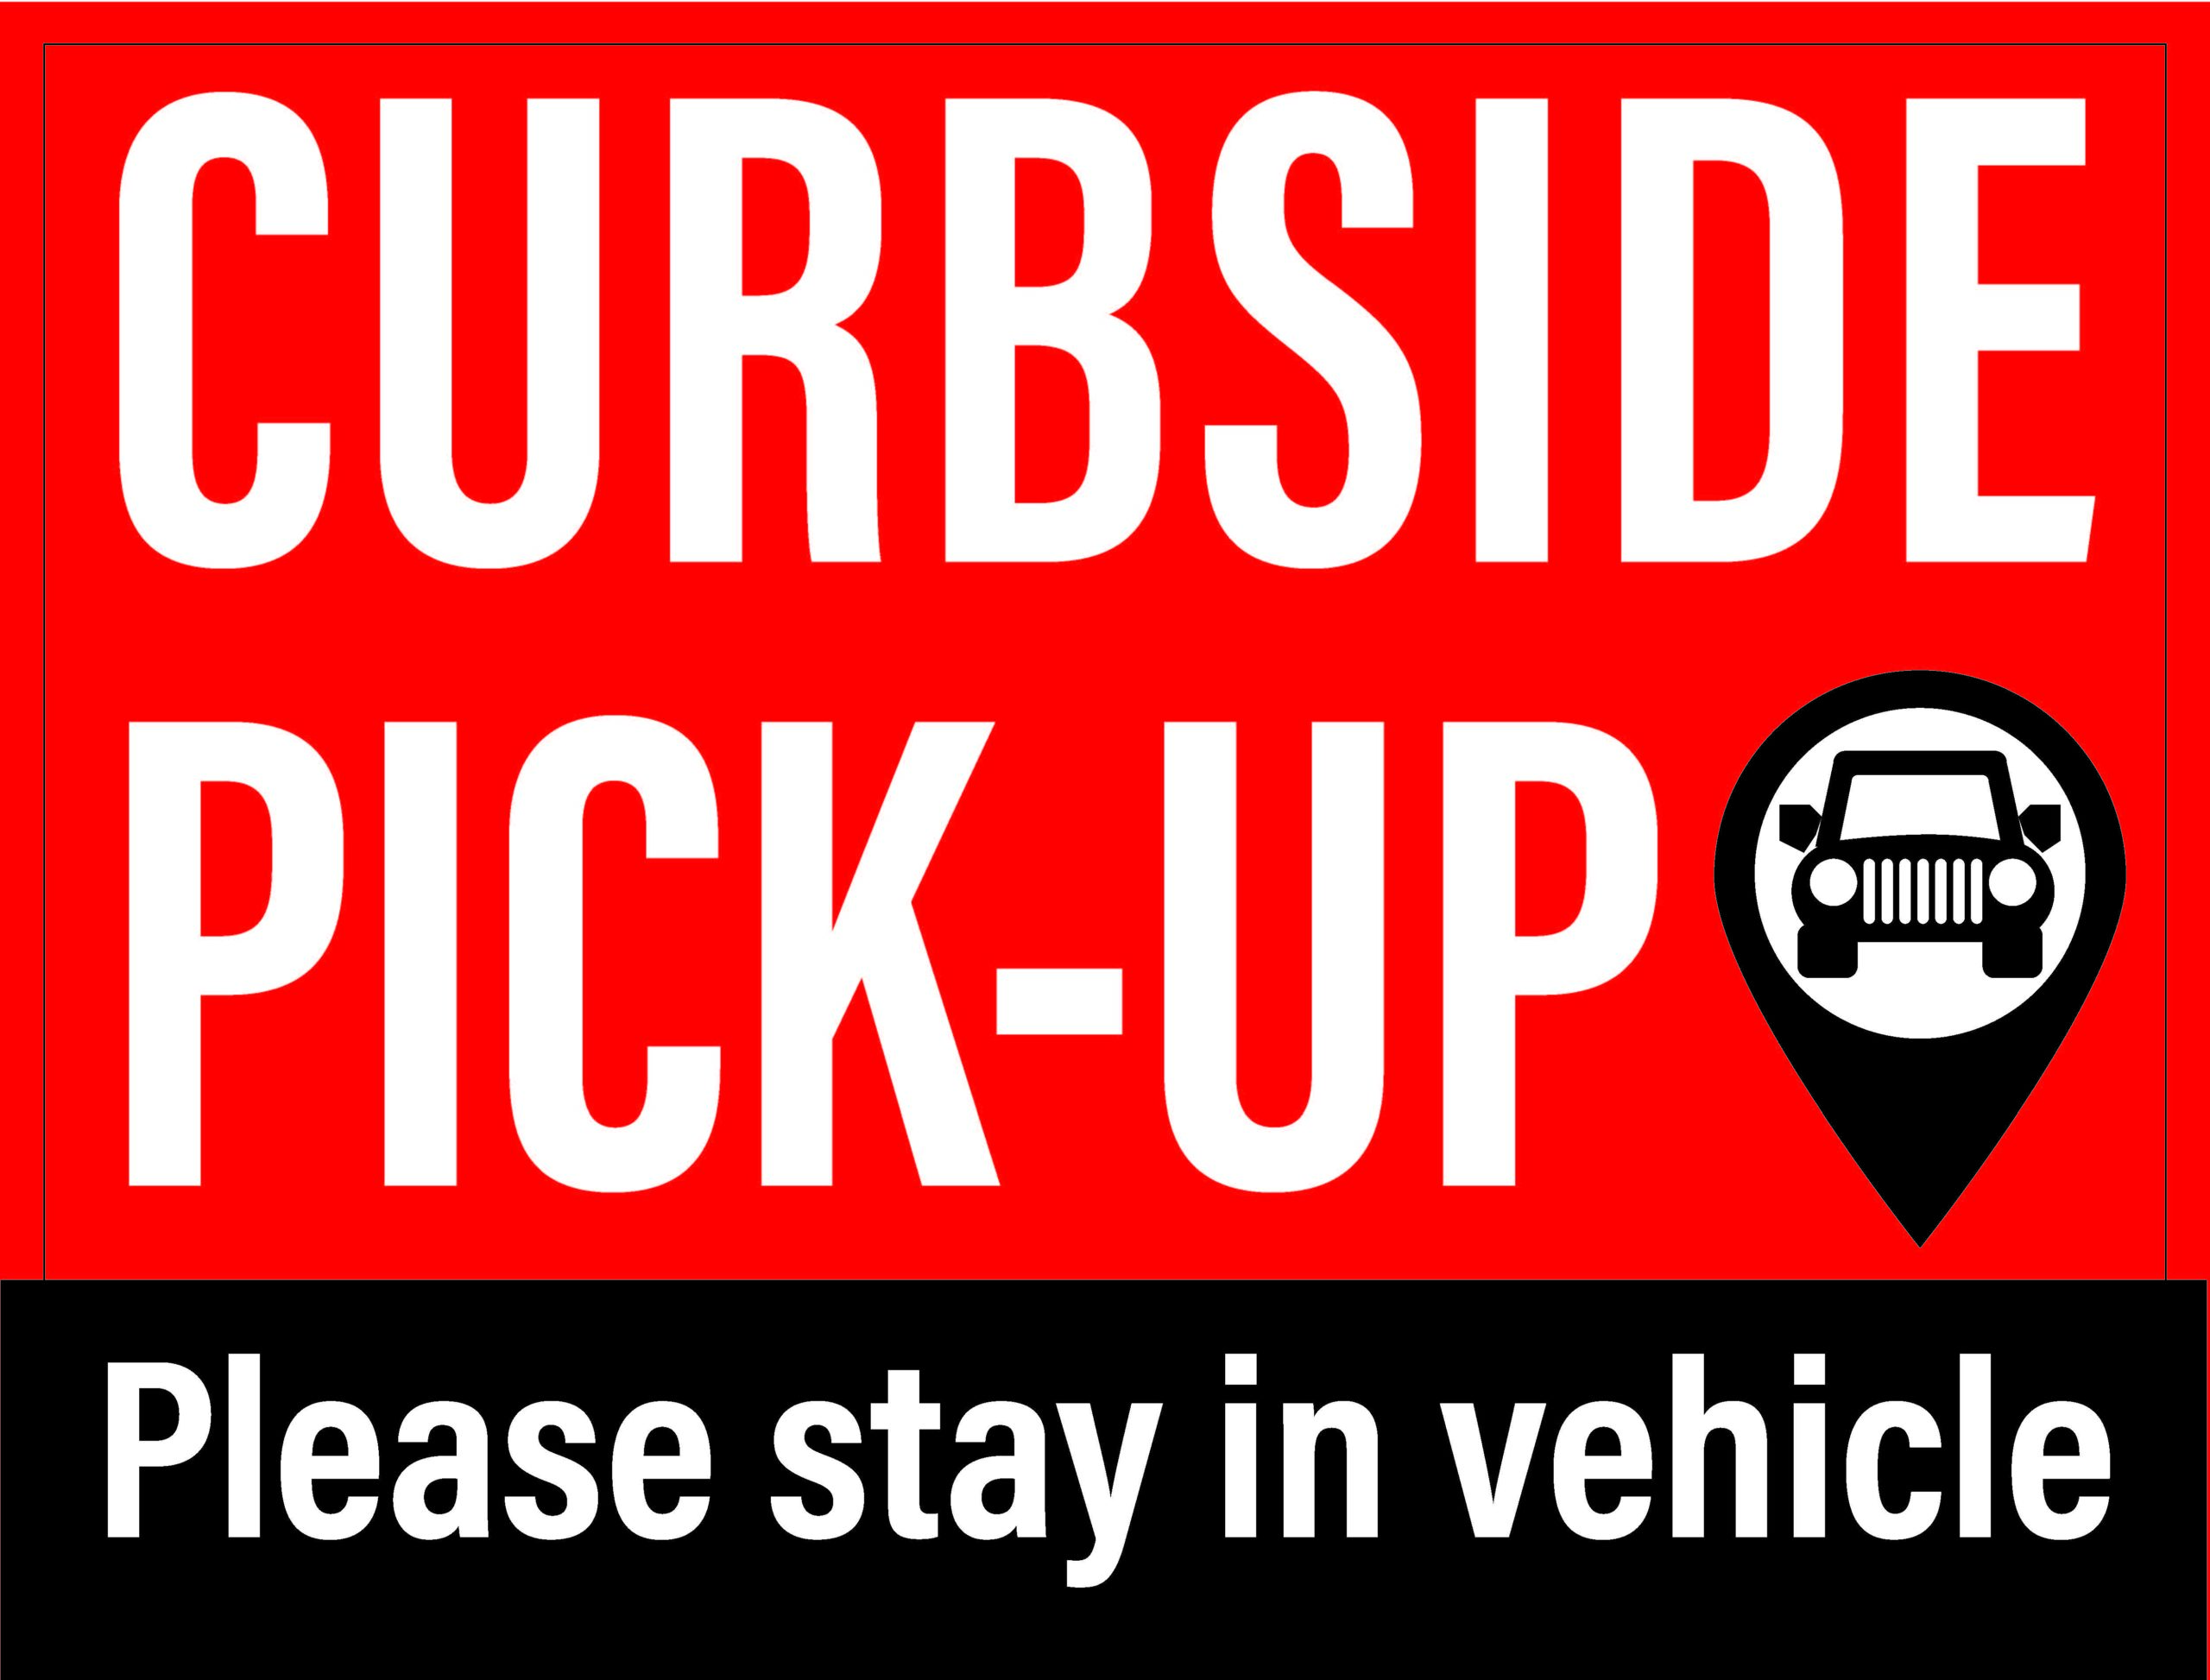 Curbside Pickup Signs 24”x 18”, printed on White Coroplast (outside) #1